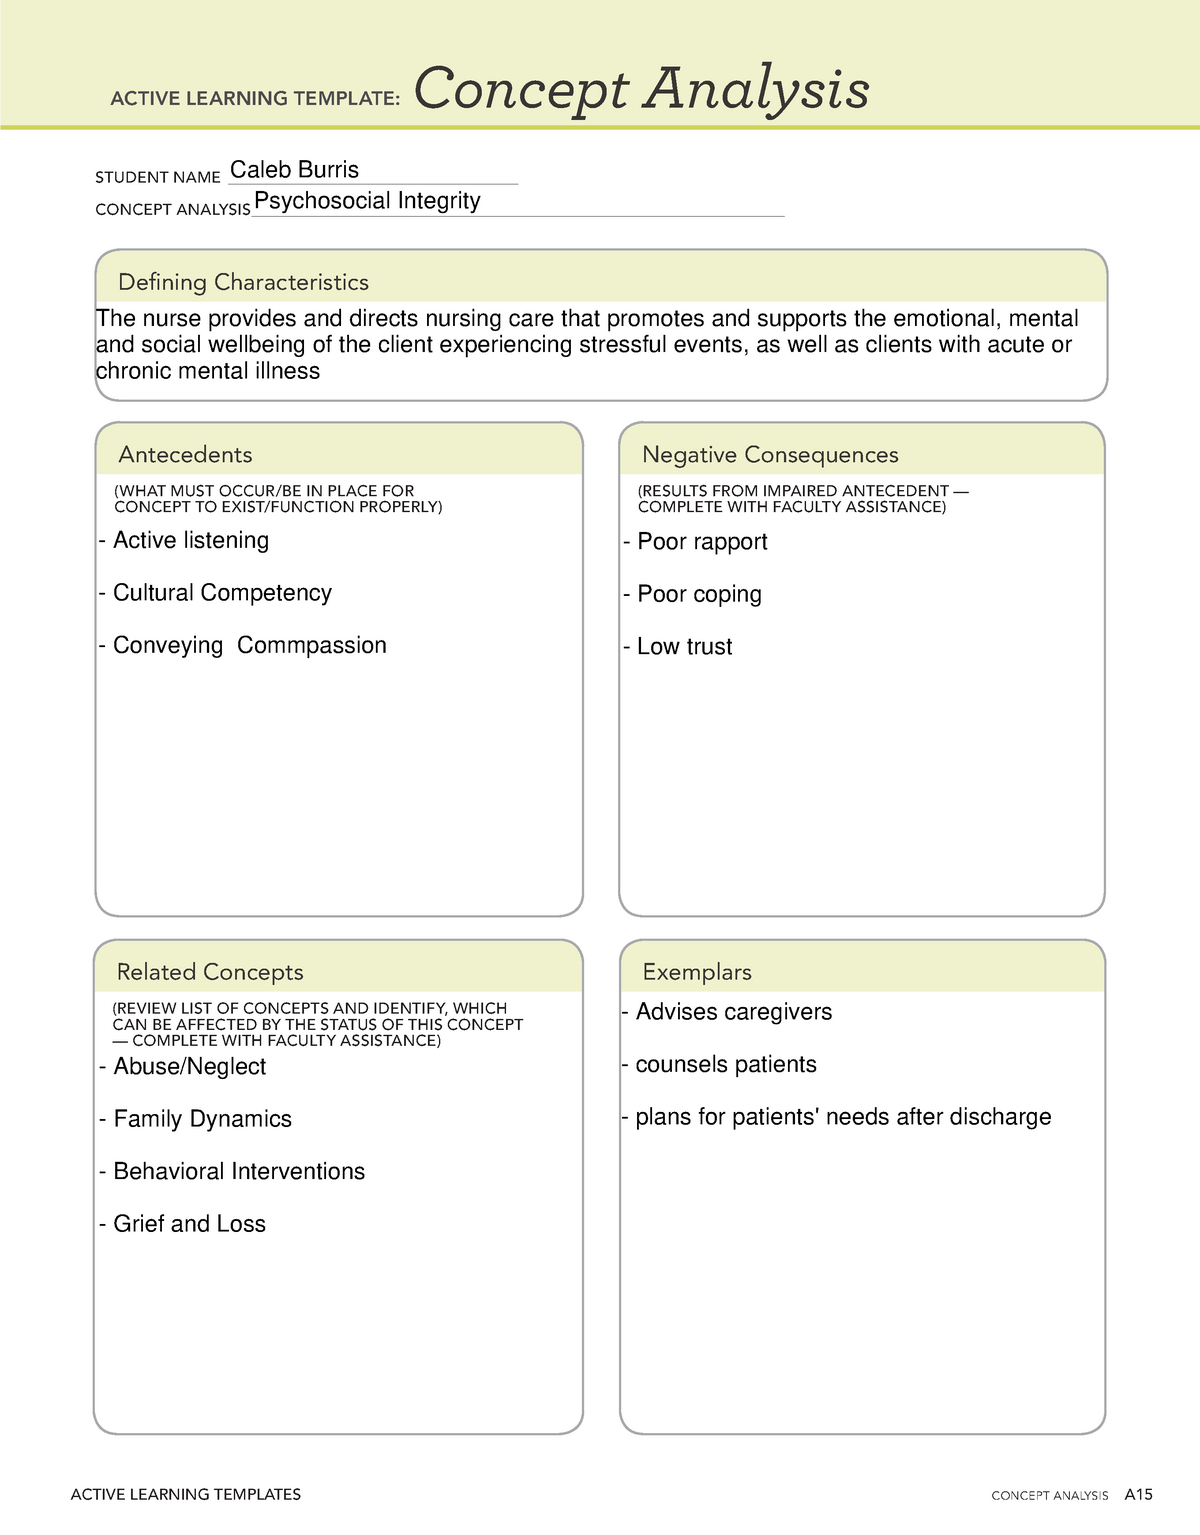 ATI Concept Analysis Psychosocial Integrity ACTIVE LEARNING TEMPLATES